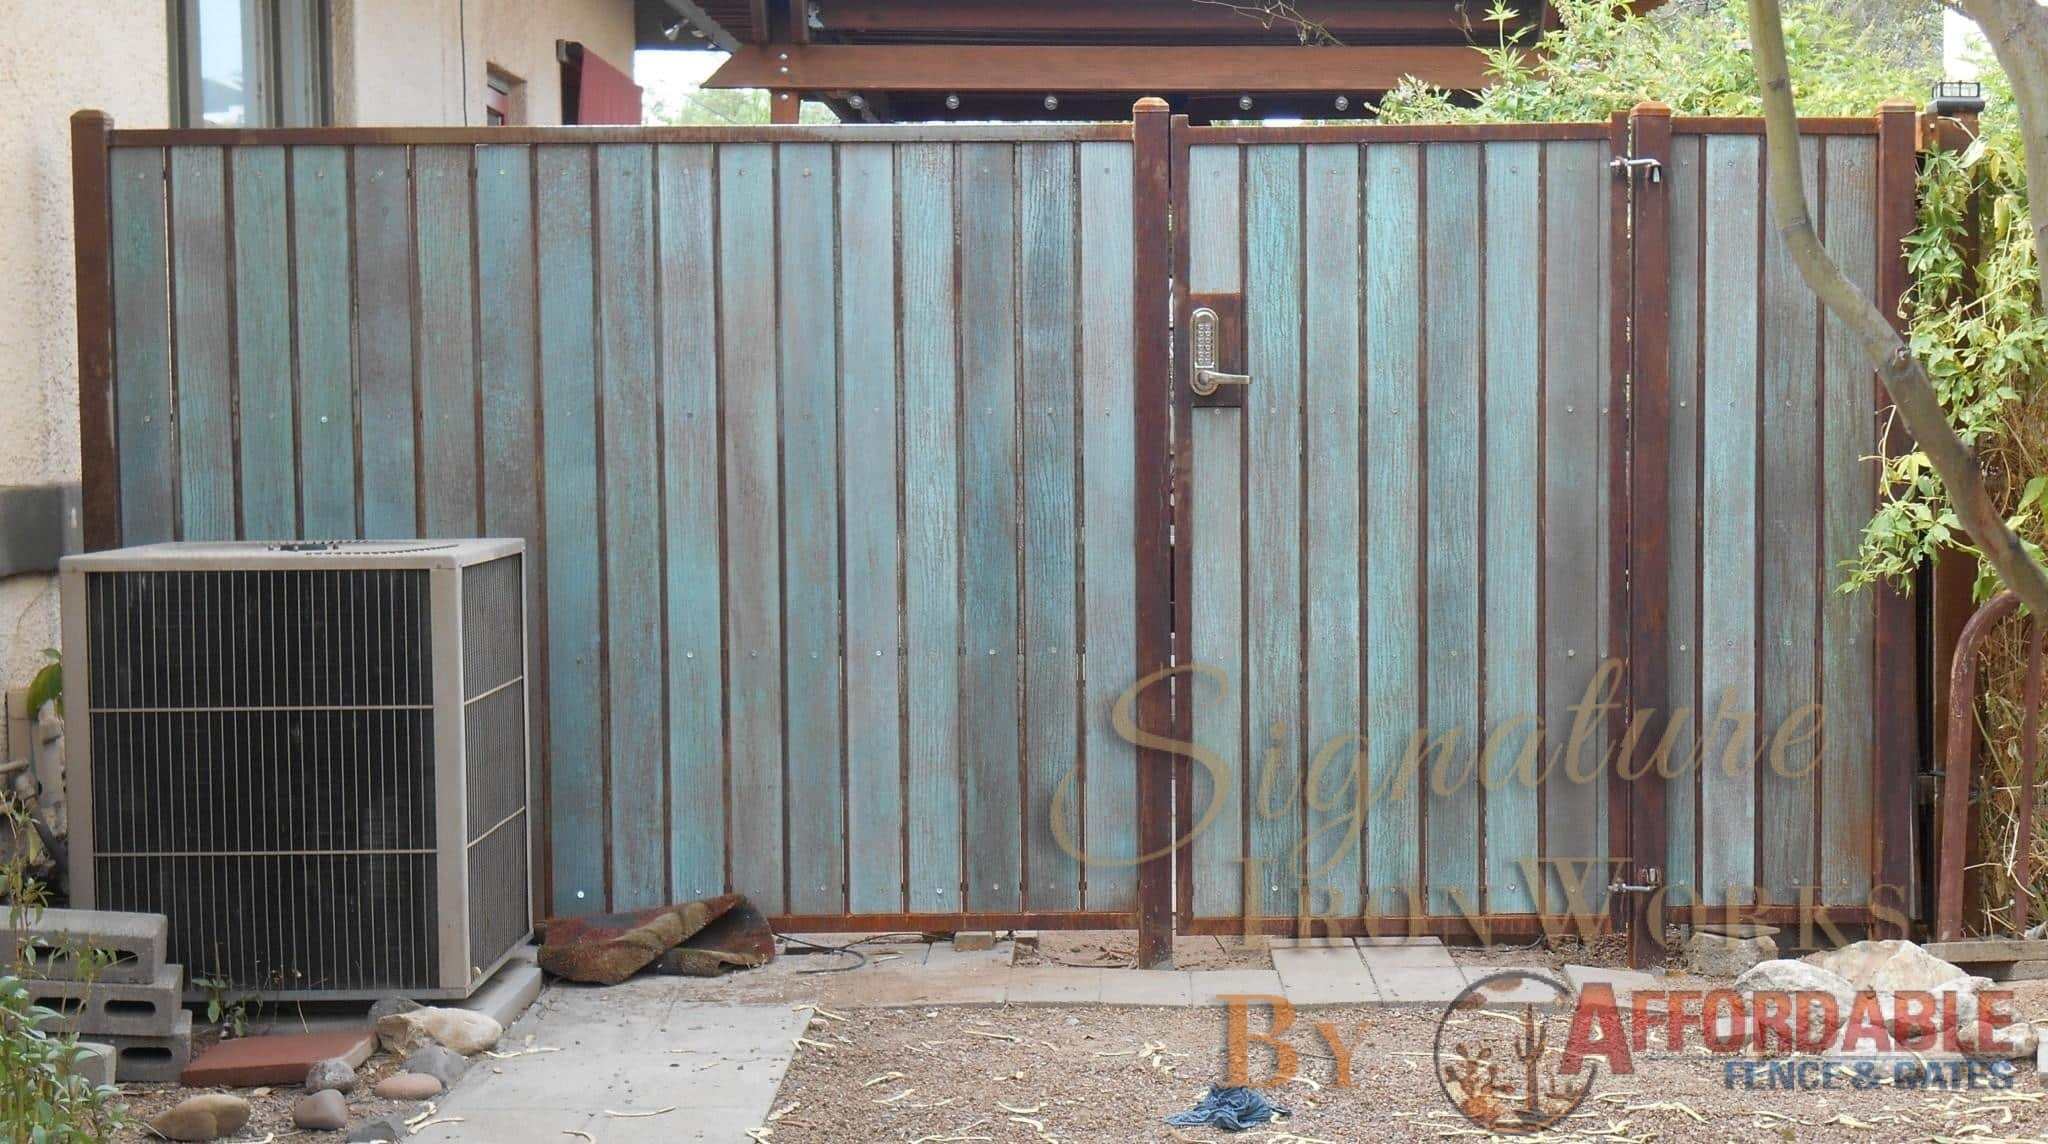 Synthetic Wood Fencing | Affordable Fence and Gates